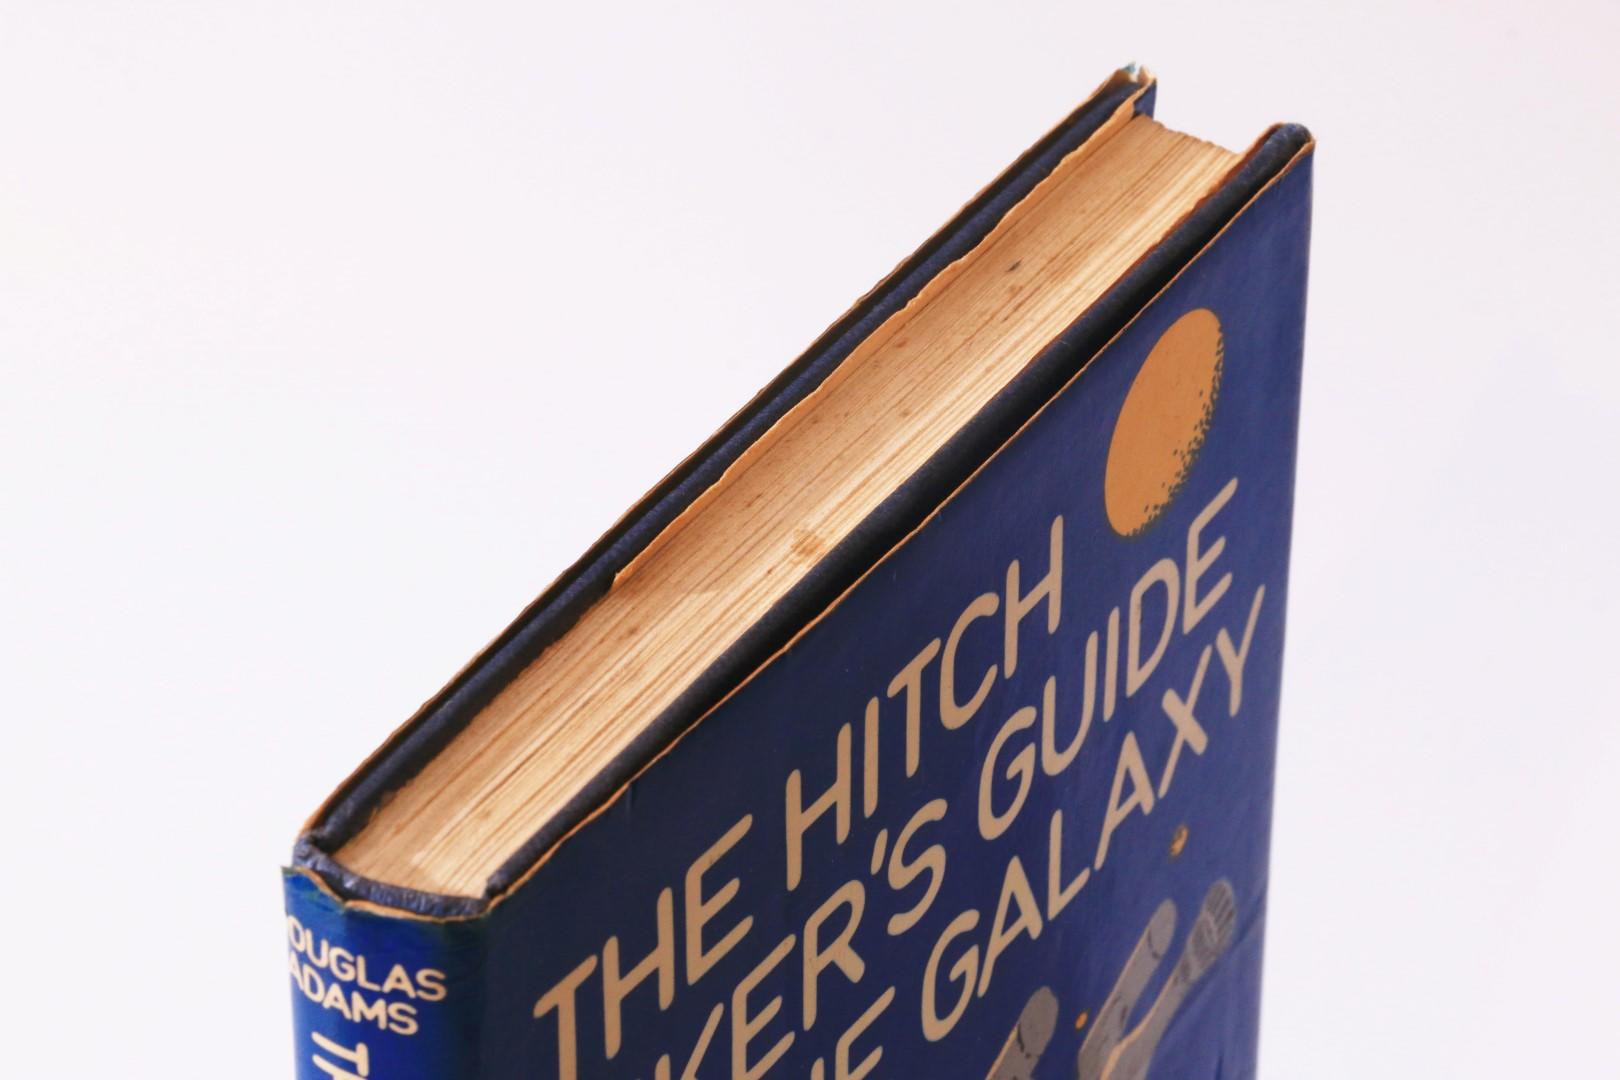 Douglas Adams - The Hitch Hiker's Guide to the Galaxy - Arthur Barker, 1979, First Edition.